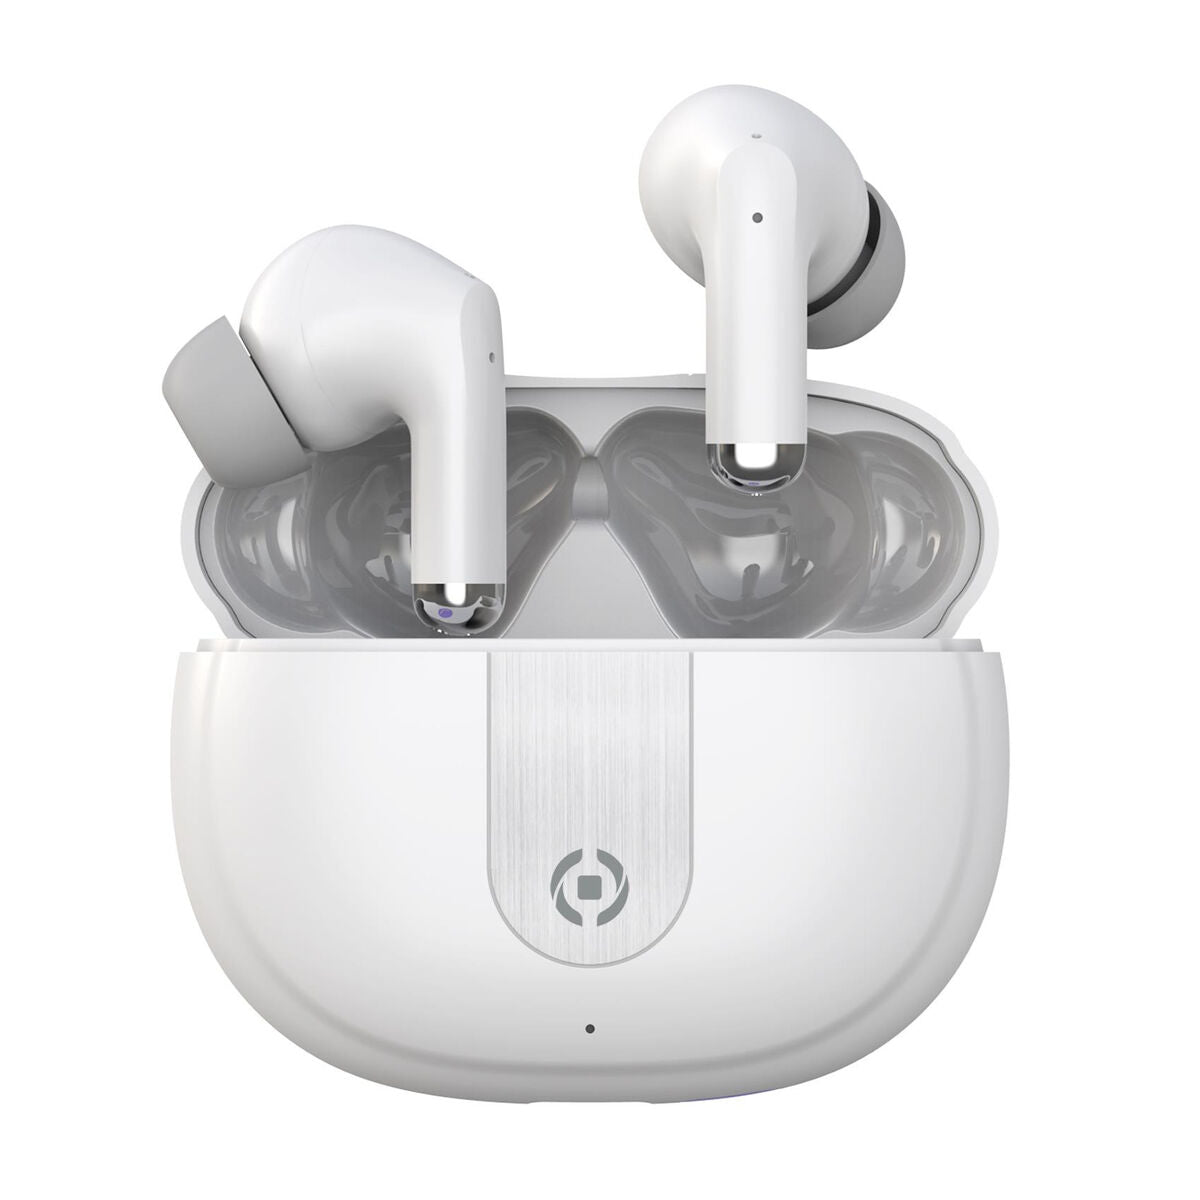 Bluetooth Headphones Celly ULTRASOUNDWH White, Celly, Electronics, Mobile communication and accessories, bluetooth-headphones-celly-ultrasoundwh-white, Brand_Celly, category-reference-2609, category-reference-2642, category-reference-2847, category-reference-t-19653, category-reference-t-21312, category-reference-t-4036, category-reference-t-4037, computers / peripherals, Condition_NEW, entertainment, gadget, music, office, Price_50 - 100, telephones & tablets, Teleworking, RiotNook